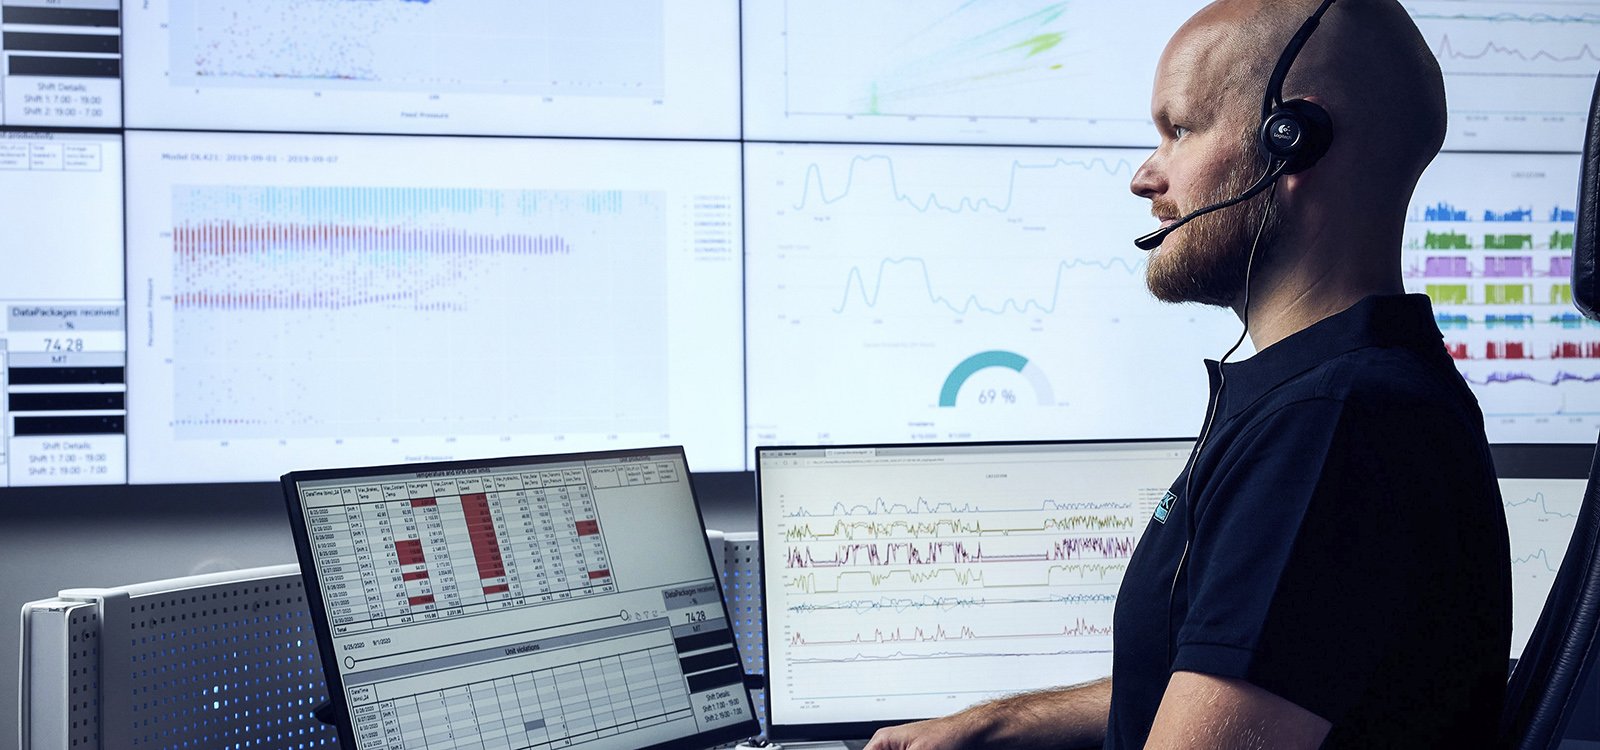 Sandvik’s team of engineers trace and analyze the data acquired from the customers’ underground production equipment around the clock.